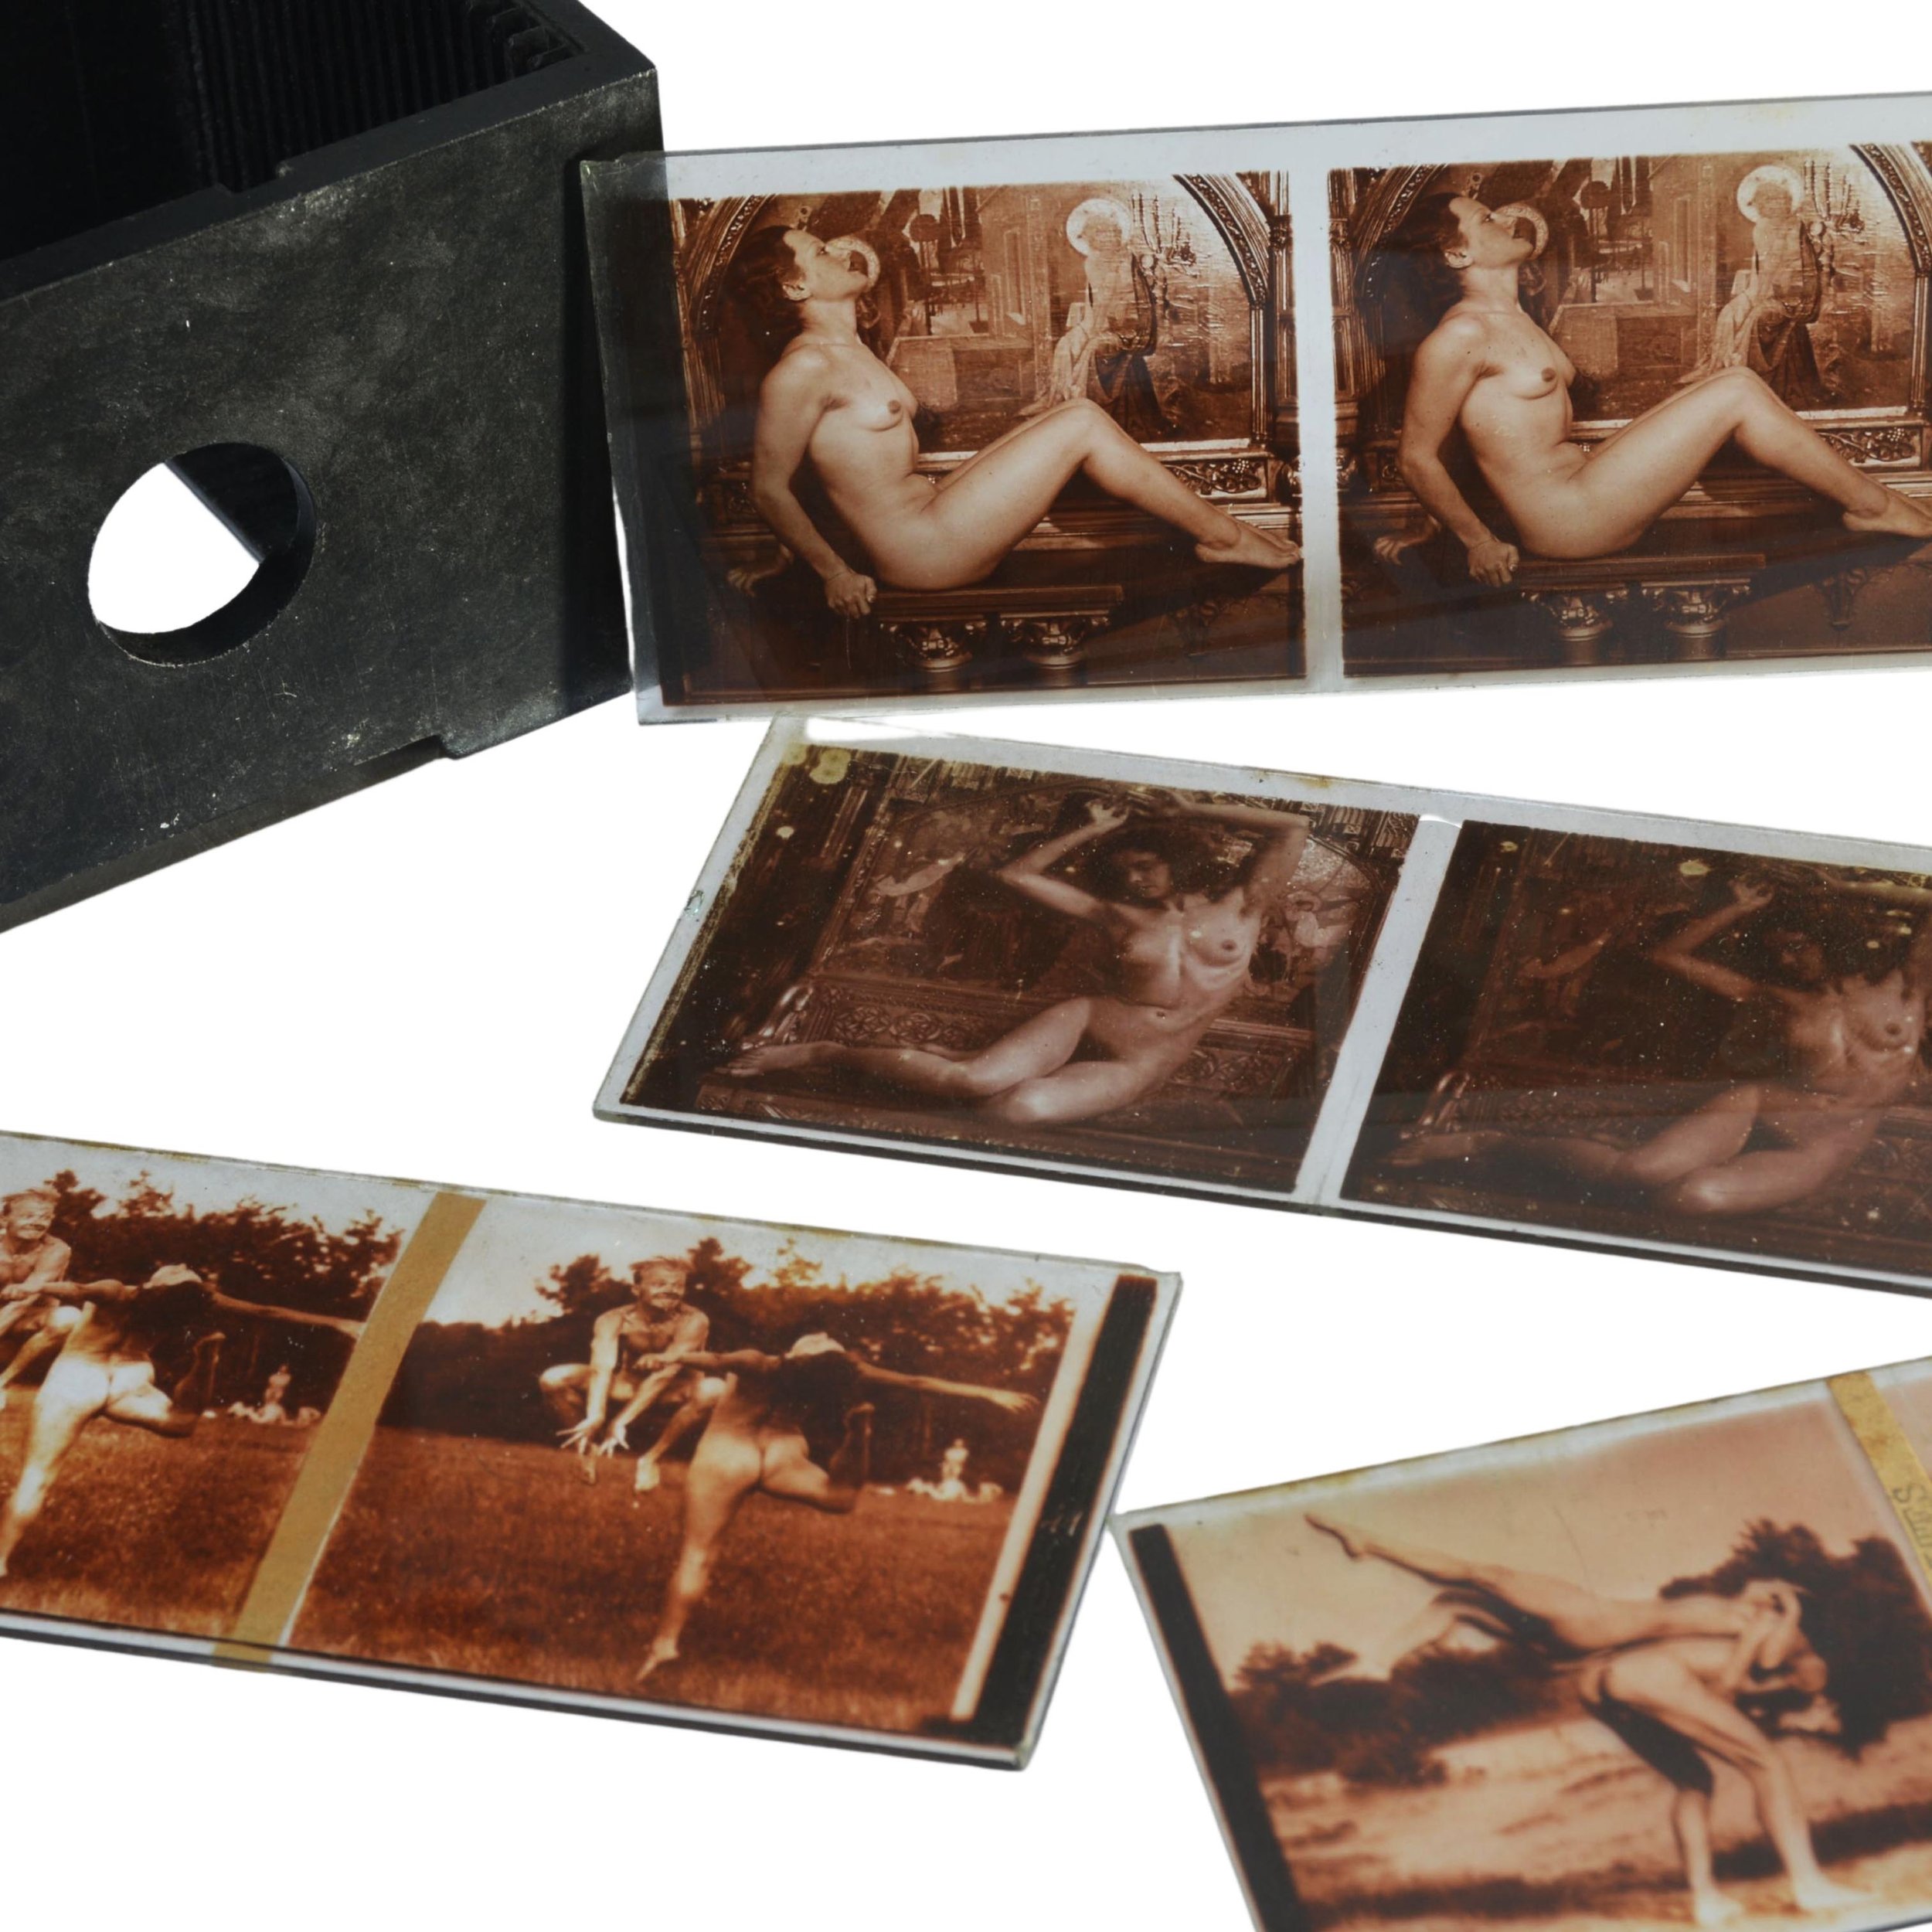 1920s stereo photographs of nudes